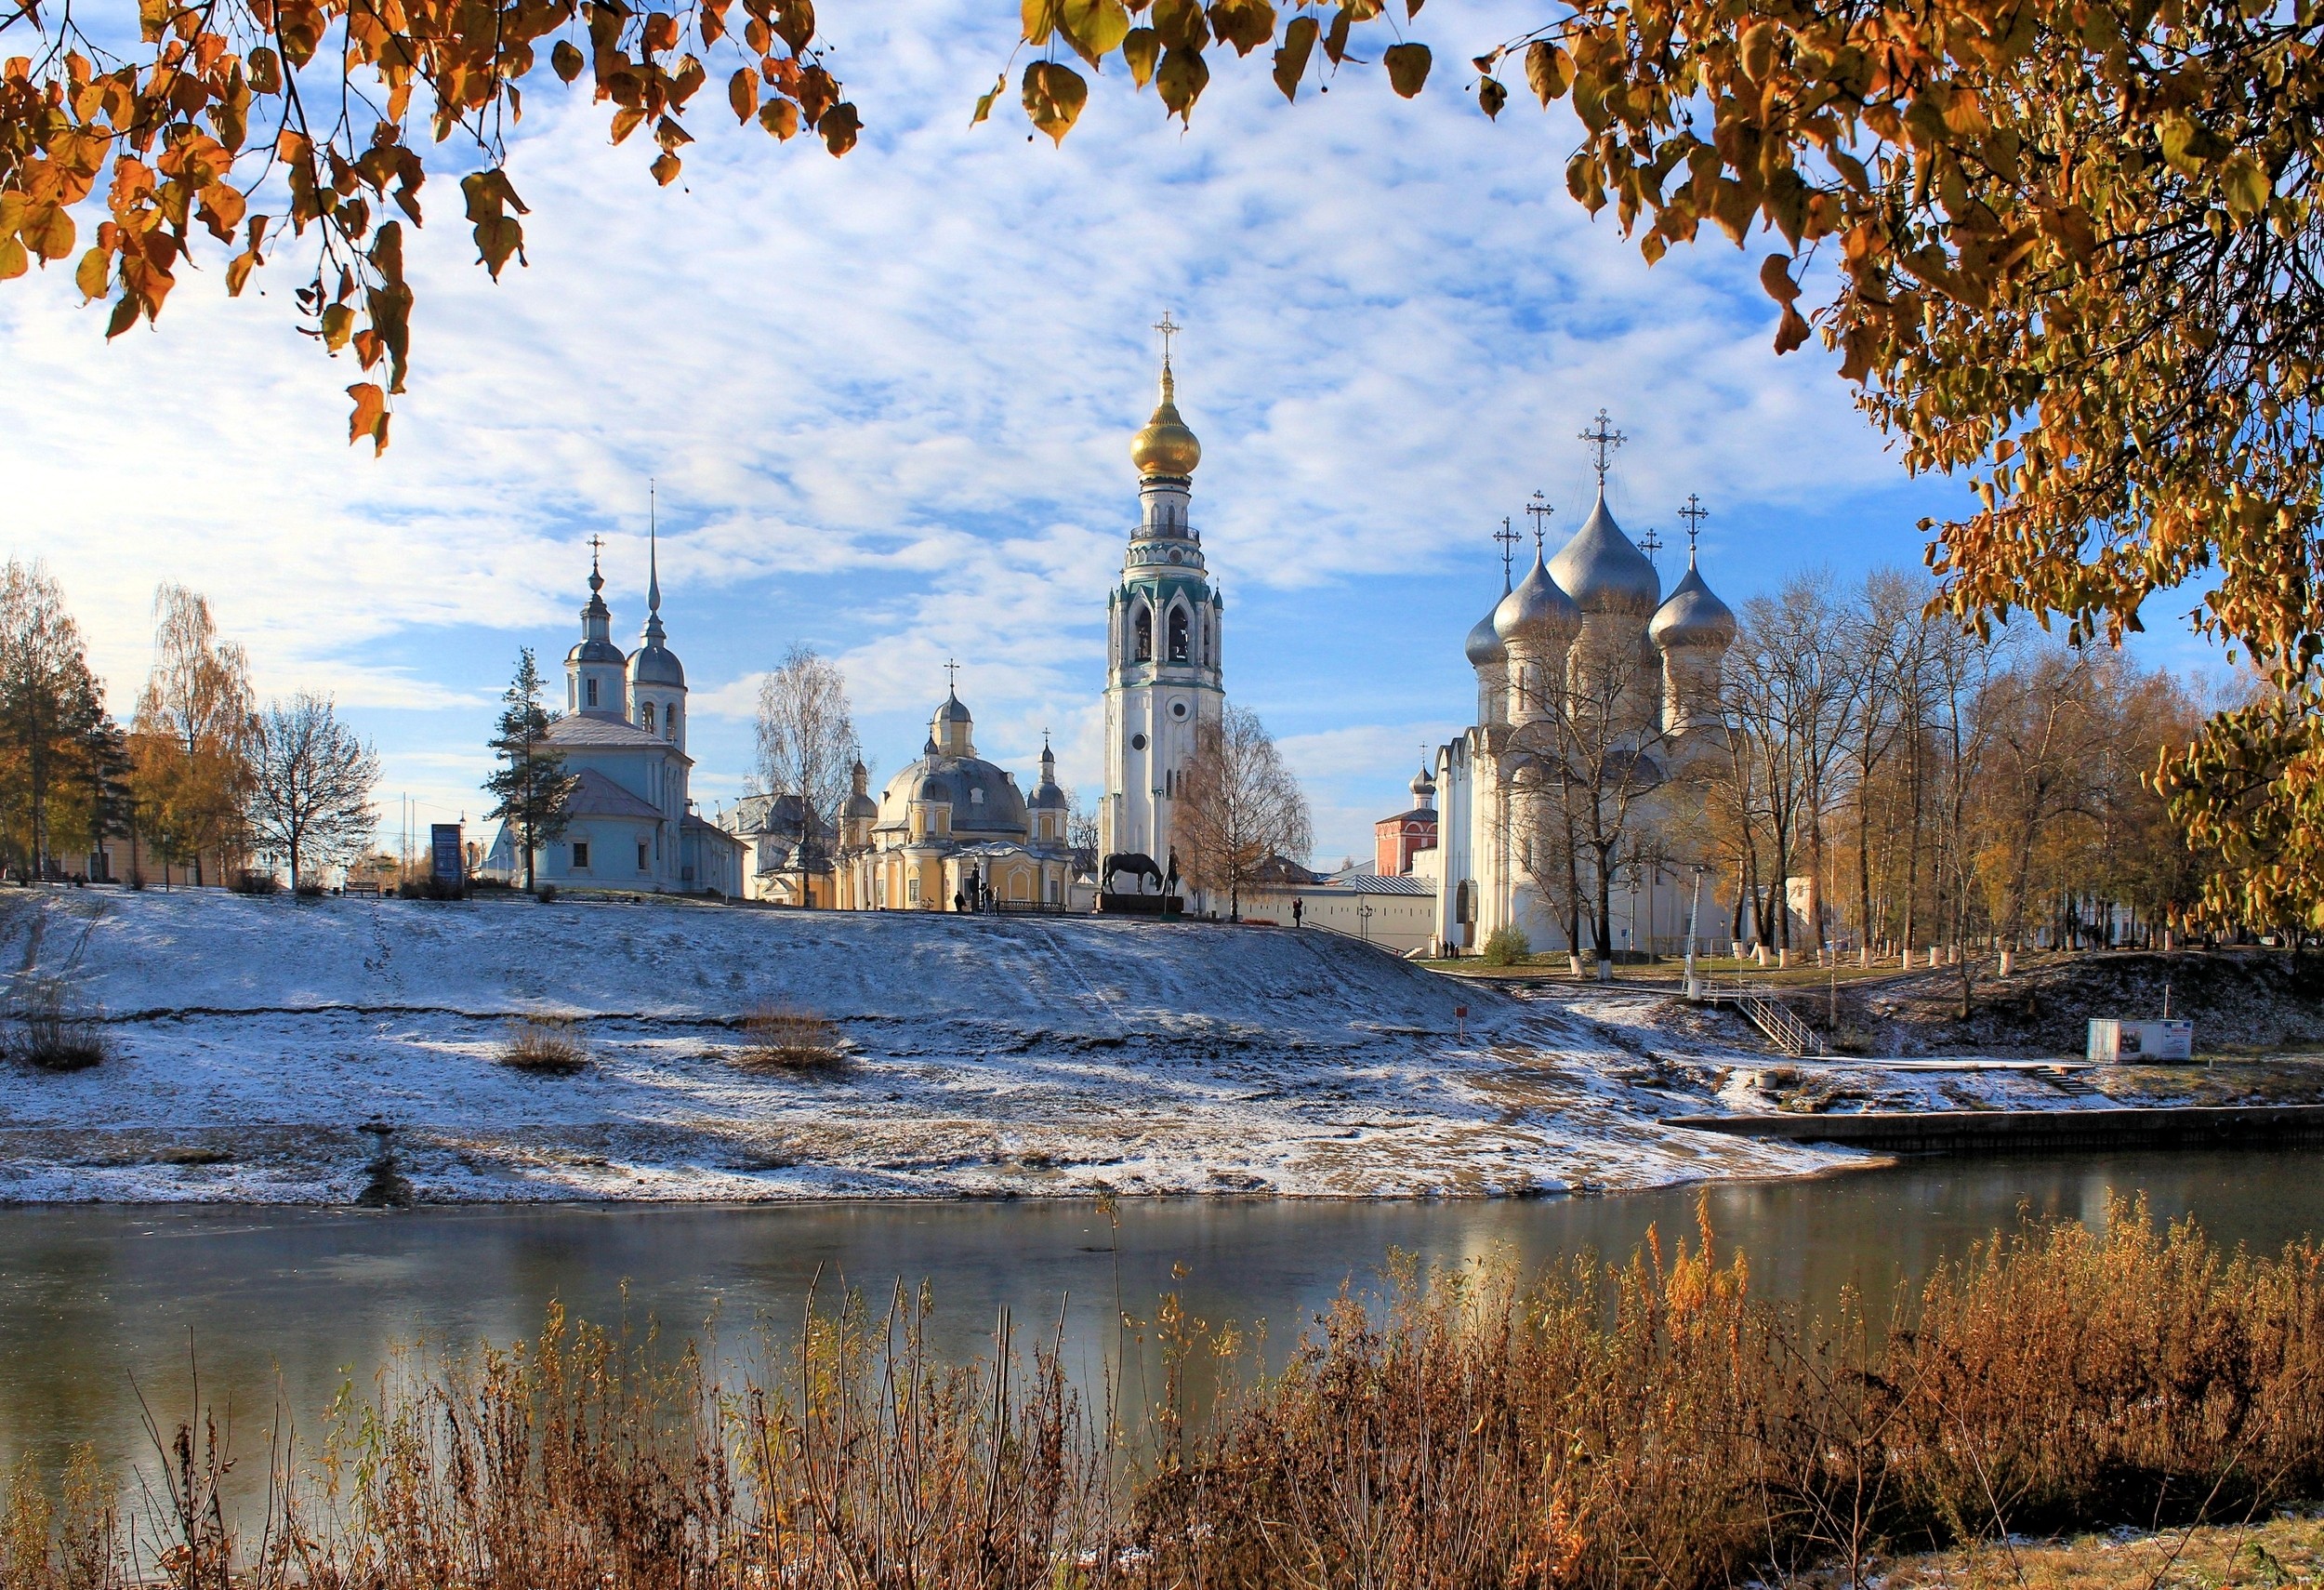 General 2500x1710 nature landscape architecture clouds water trees Russia winter snow river church tower leaves cross